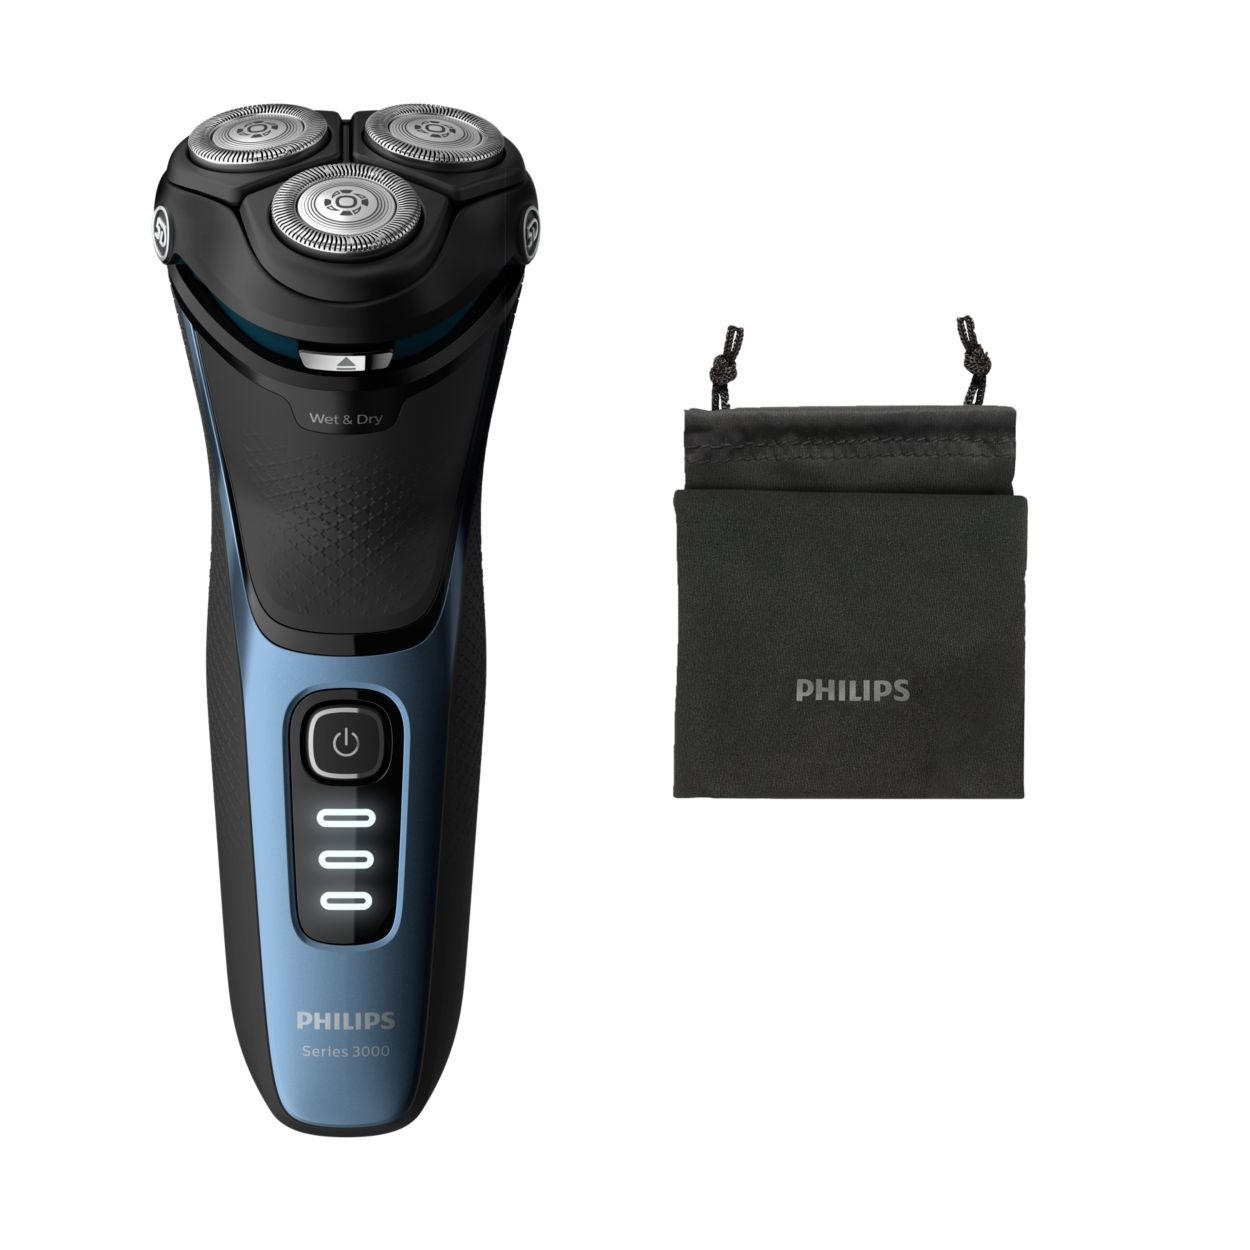 Shaver series 3000 Wet or Dry electric shaver, Series 3000 S3232/52